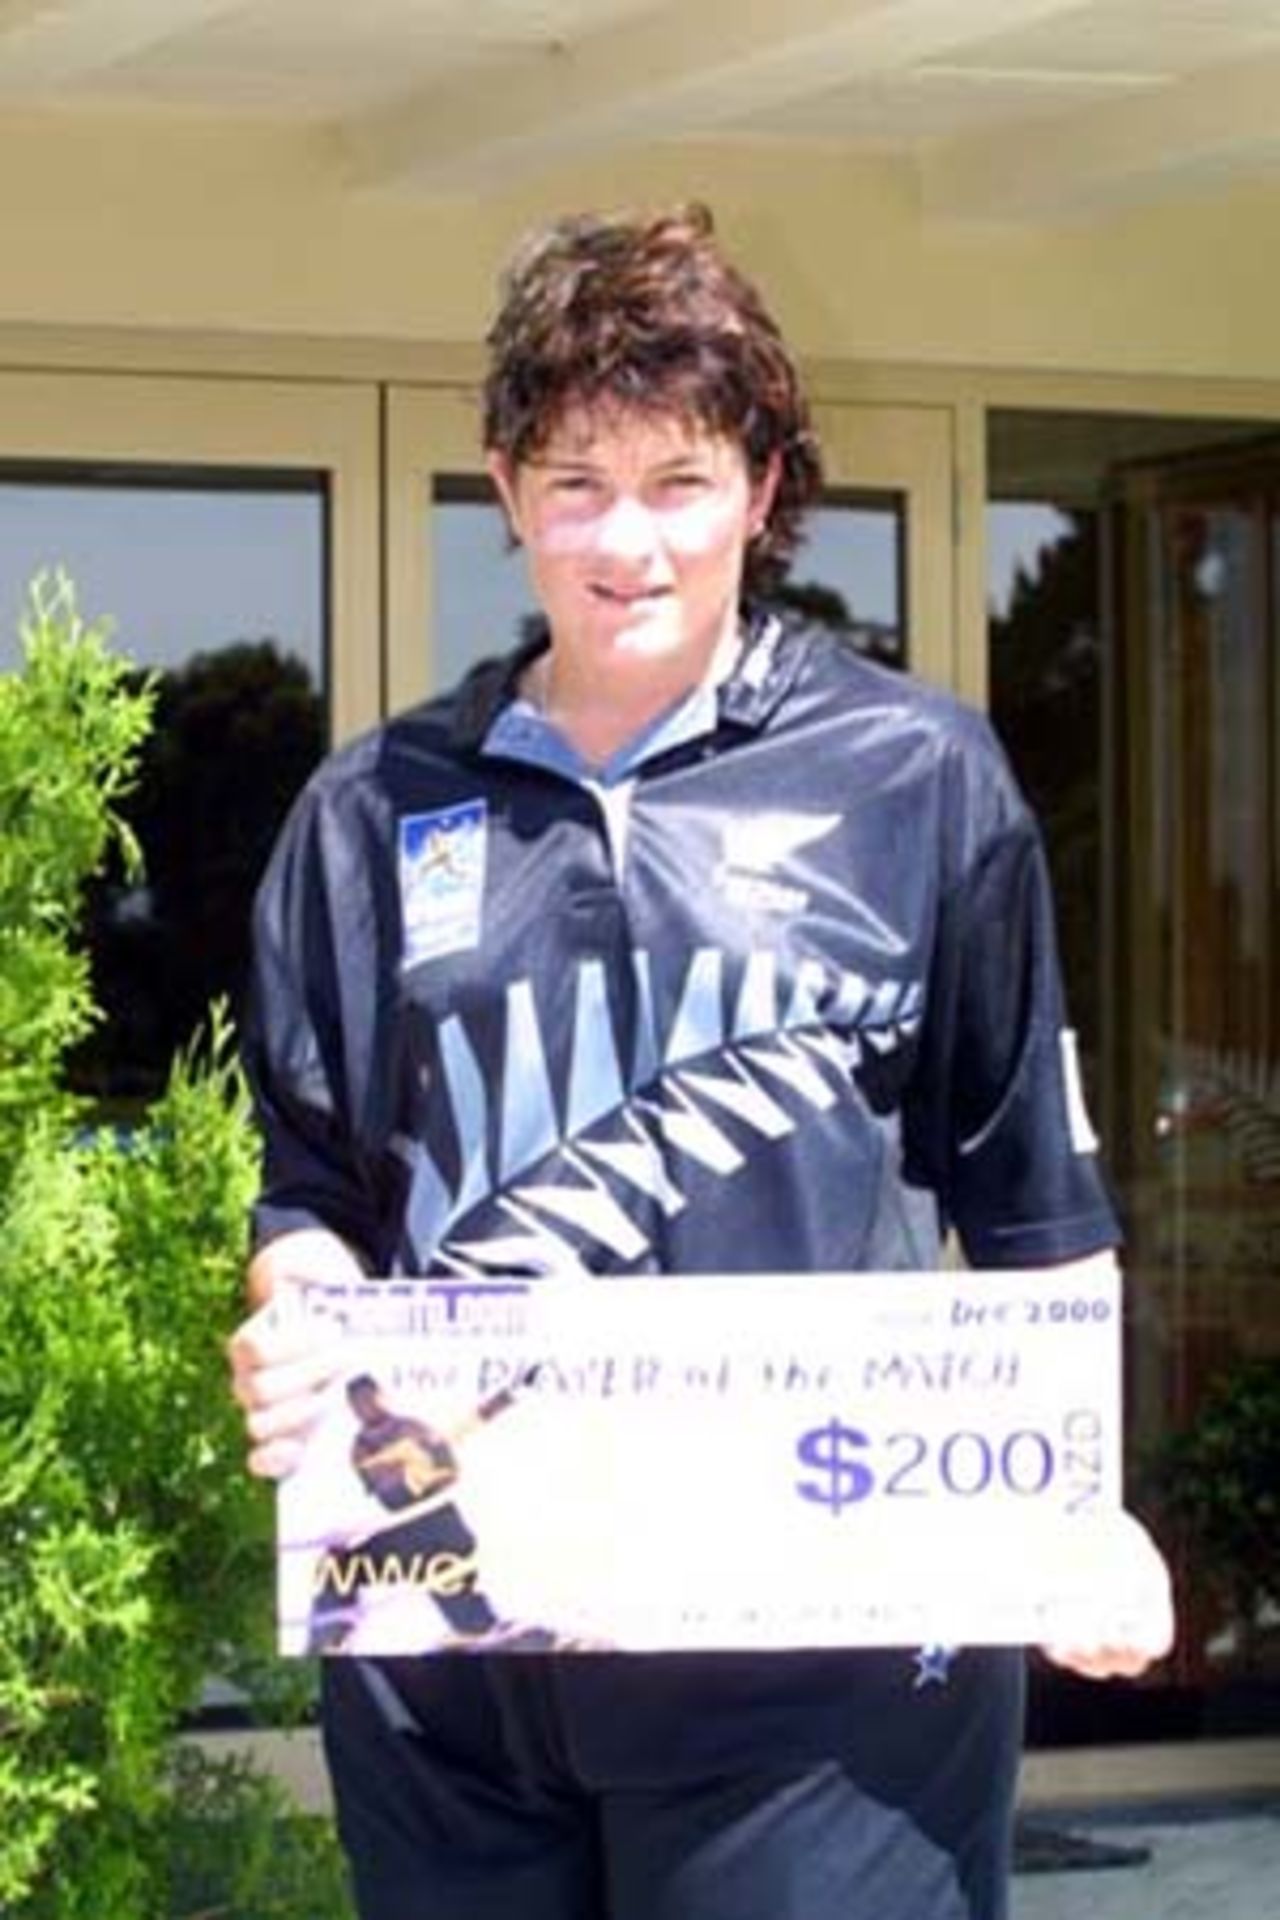 New Zealand v Ireland in the 2000 CricInfo Women's World Cup, New Zealand BIL Oval at Lincoln